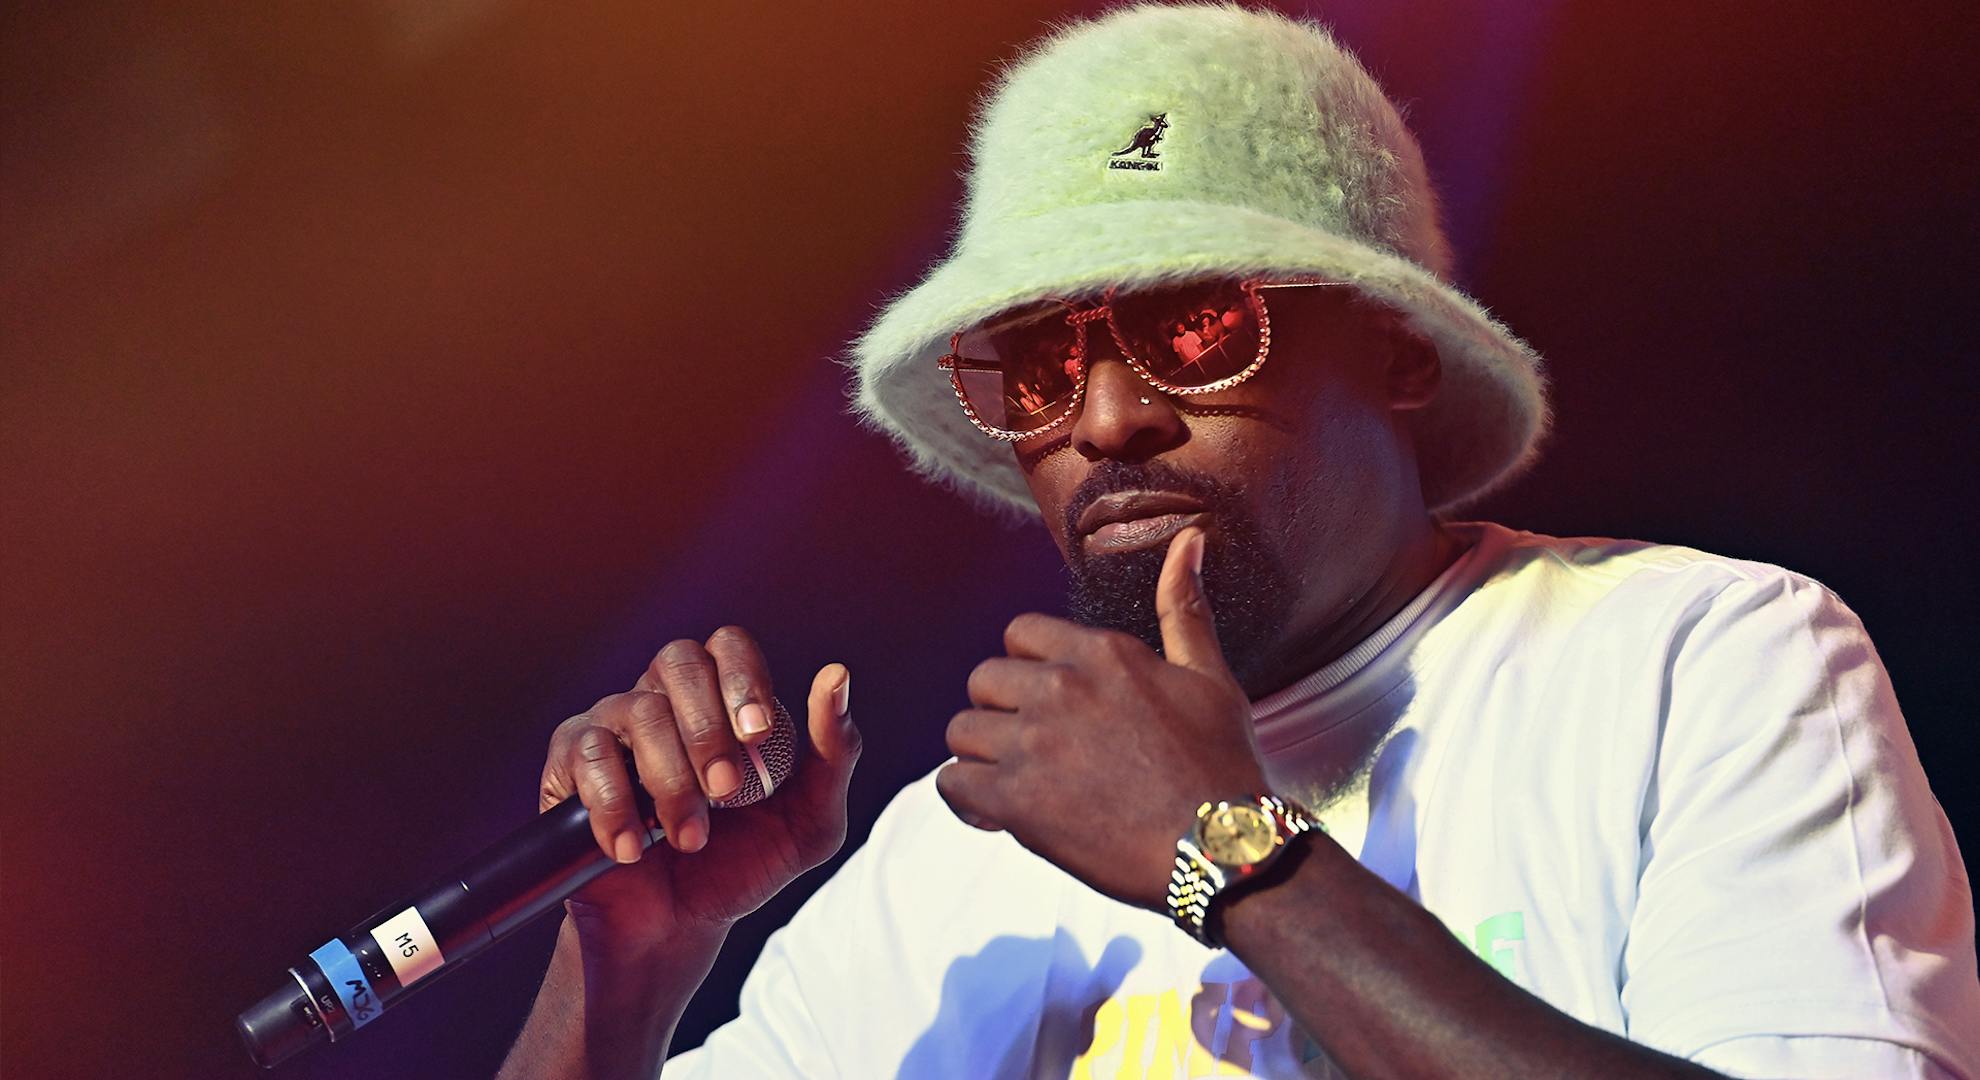 Rapper MJG performs onstage during VERZUZ 8 Ball & MJG vs UGK at Terminal West on May 26, 2022 in Atlanta, Georgia. (Photo by Paras Griffin/Getty Images)